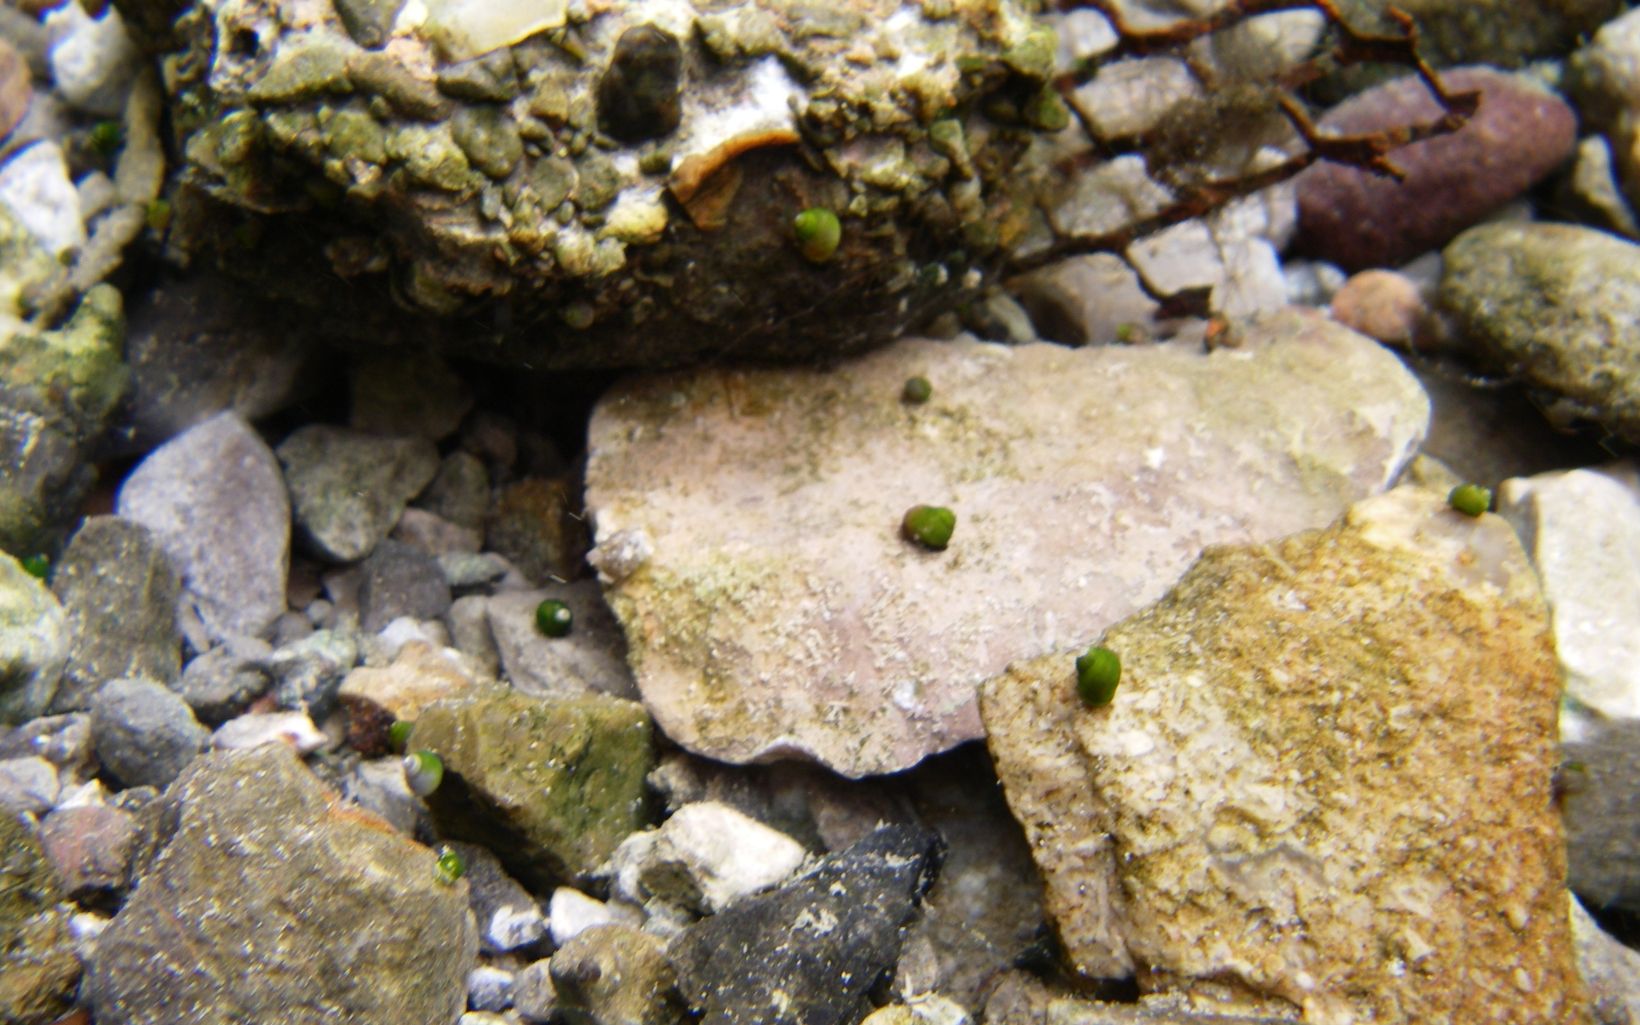 Springsnails  Wet systems support freshwater snails that occur in springs, or springsnails. Over 100 of these species have been documented in Nevada, many of which occur in only one spring. © Courtesy Laurel Saito